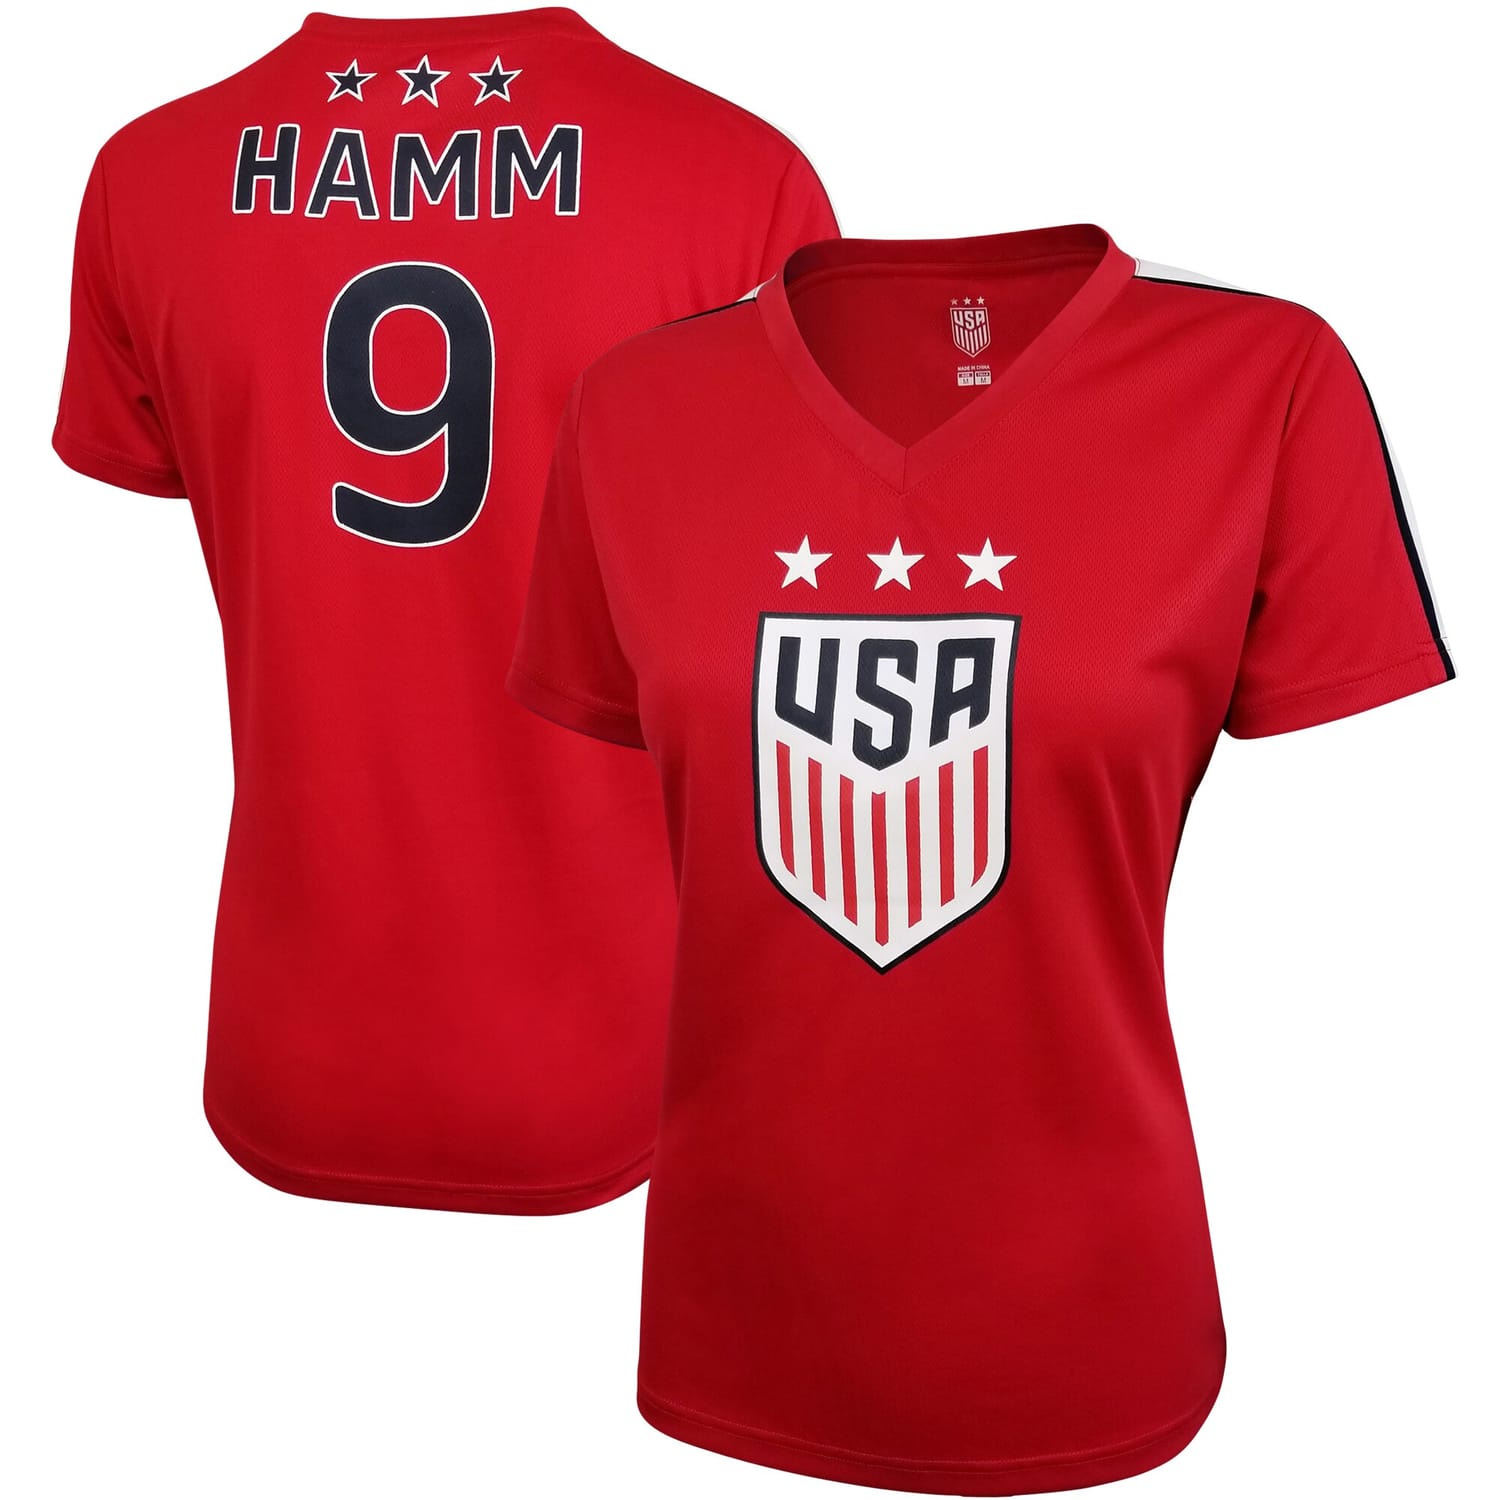 USWNT Jersey Shirt Red 1999 player Mia Hamm printing for Women